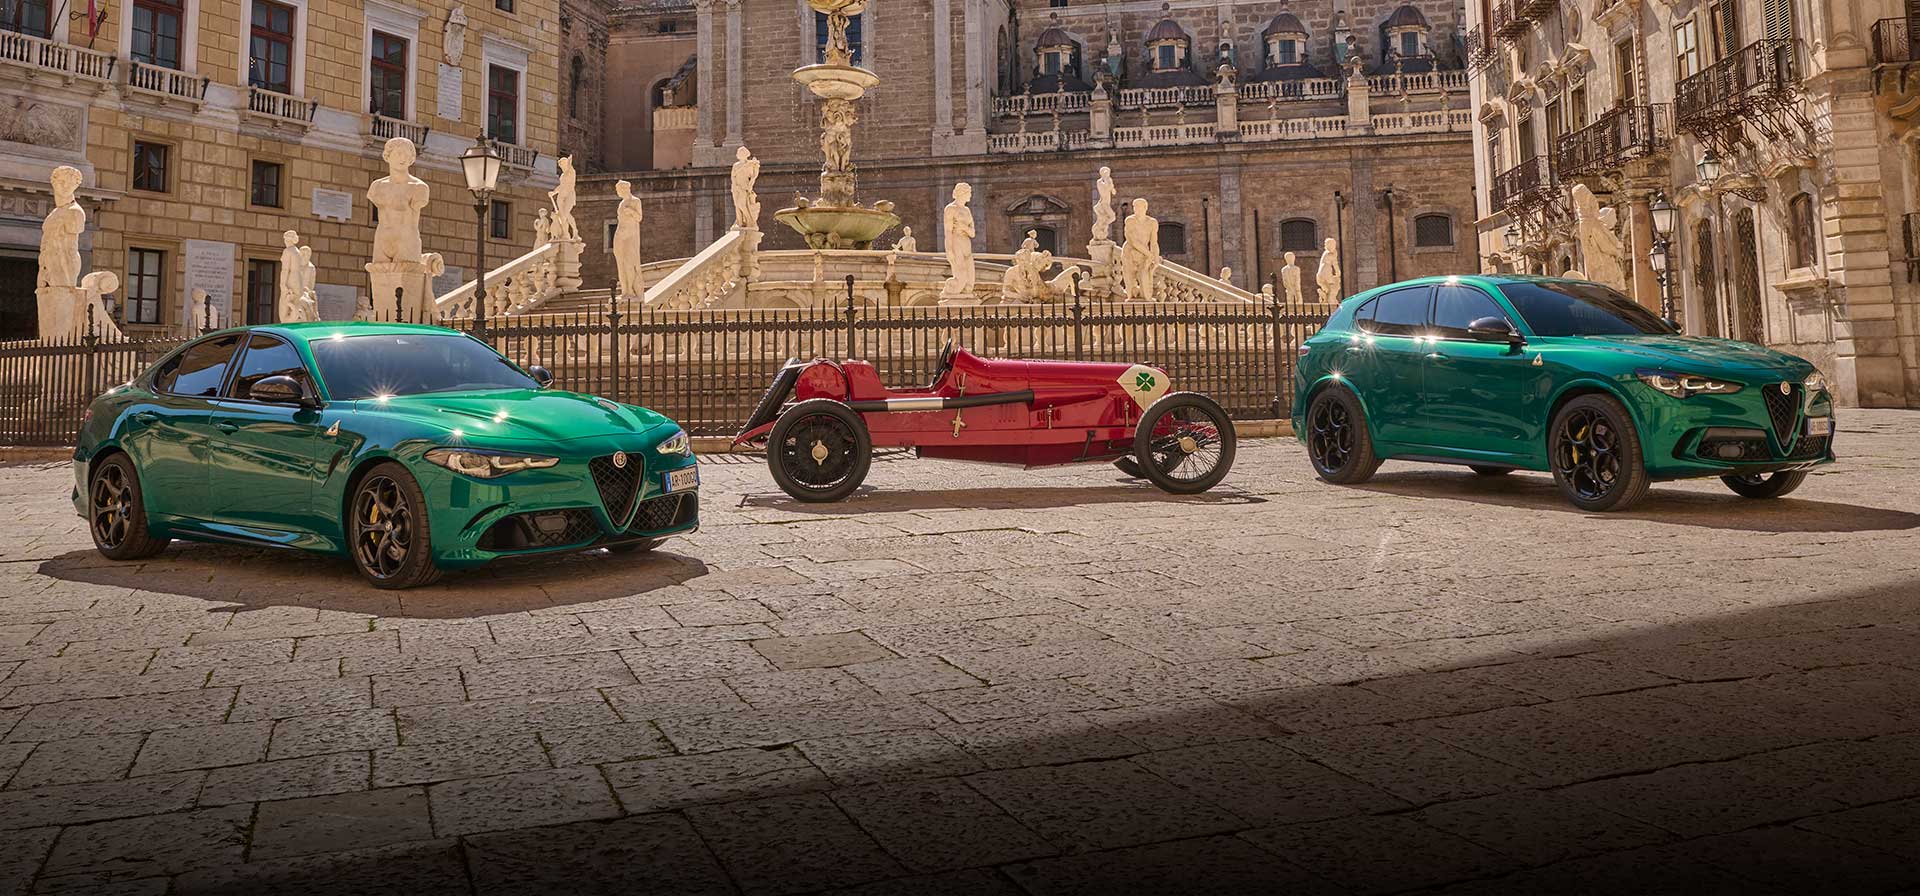 Three Alfa Romeo Quadrifoglio vehicles parked in a courtyard surrounded by Renaissance architecture. From left to right--a green 2024 Alfa Romeo Giulia Quadrifoglio, a vintage red Alfa Romeo Quadrifoglio race car and a green 2024 Alfa Romeo Stelvio Quadrifoglio.